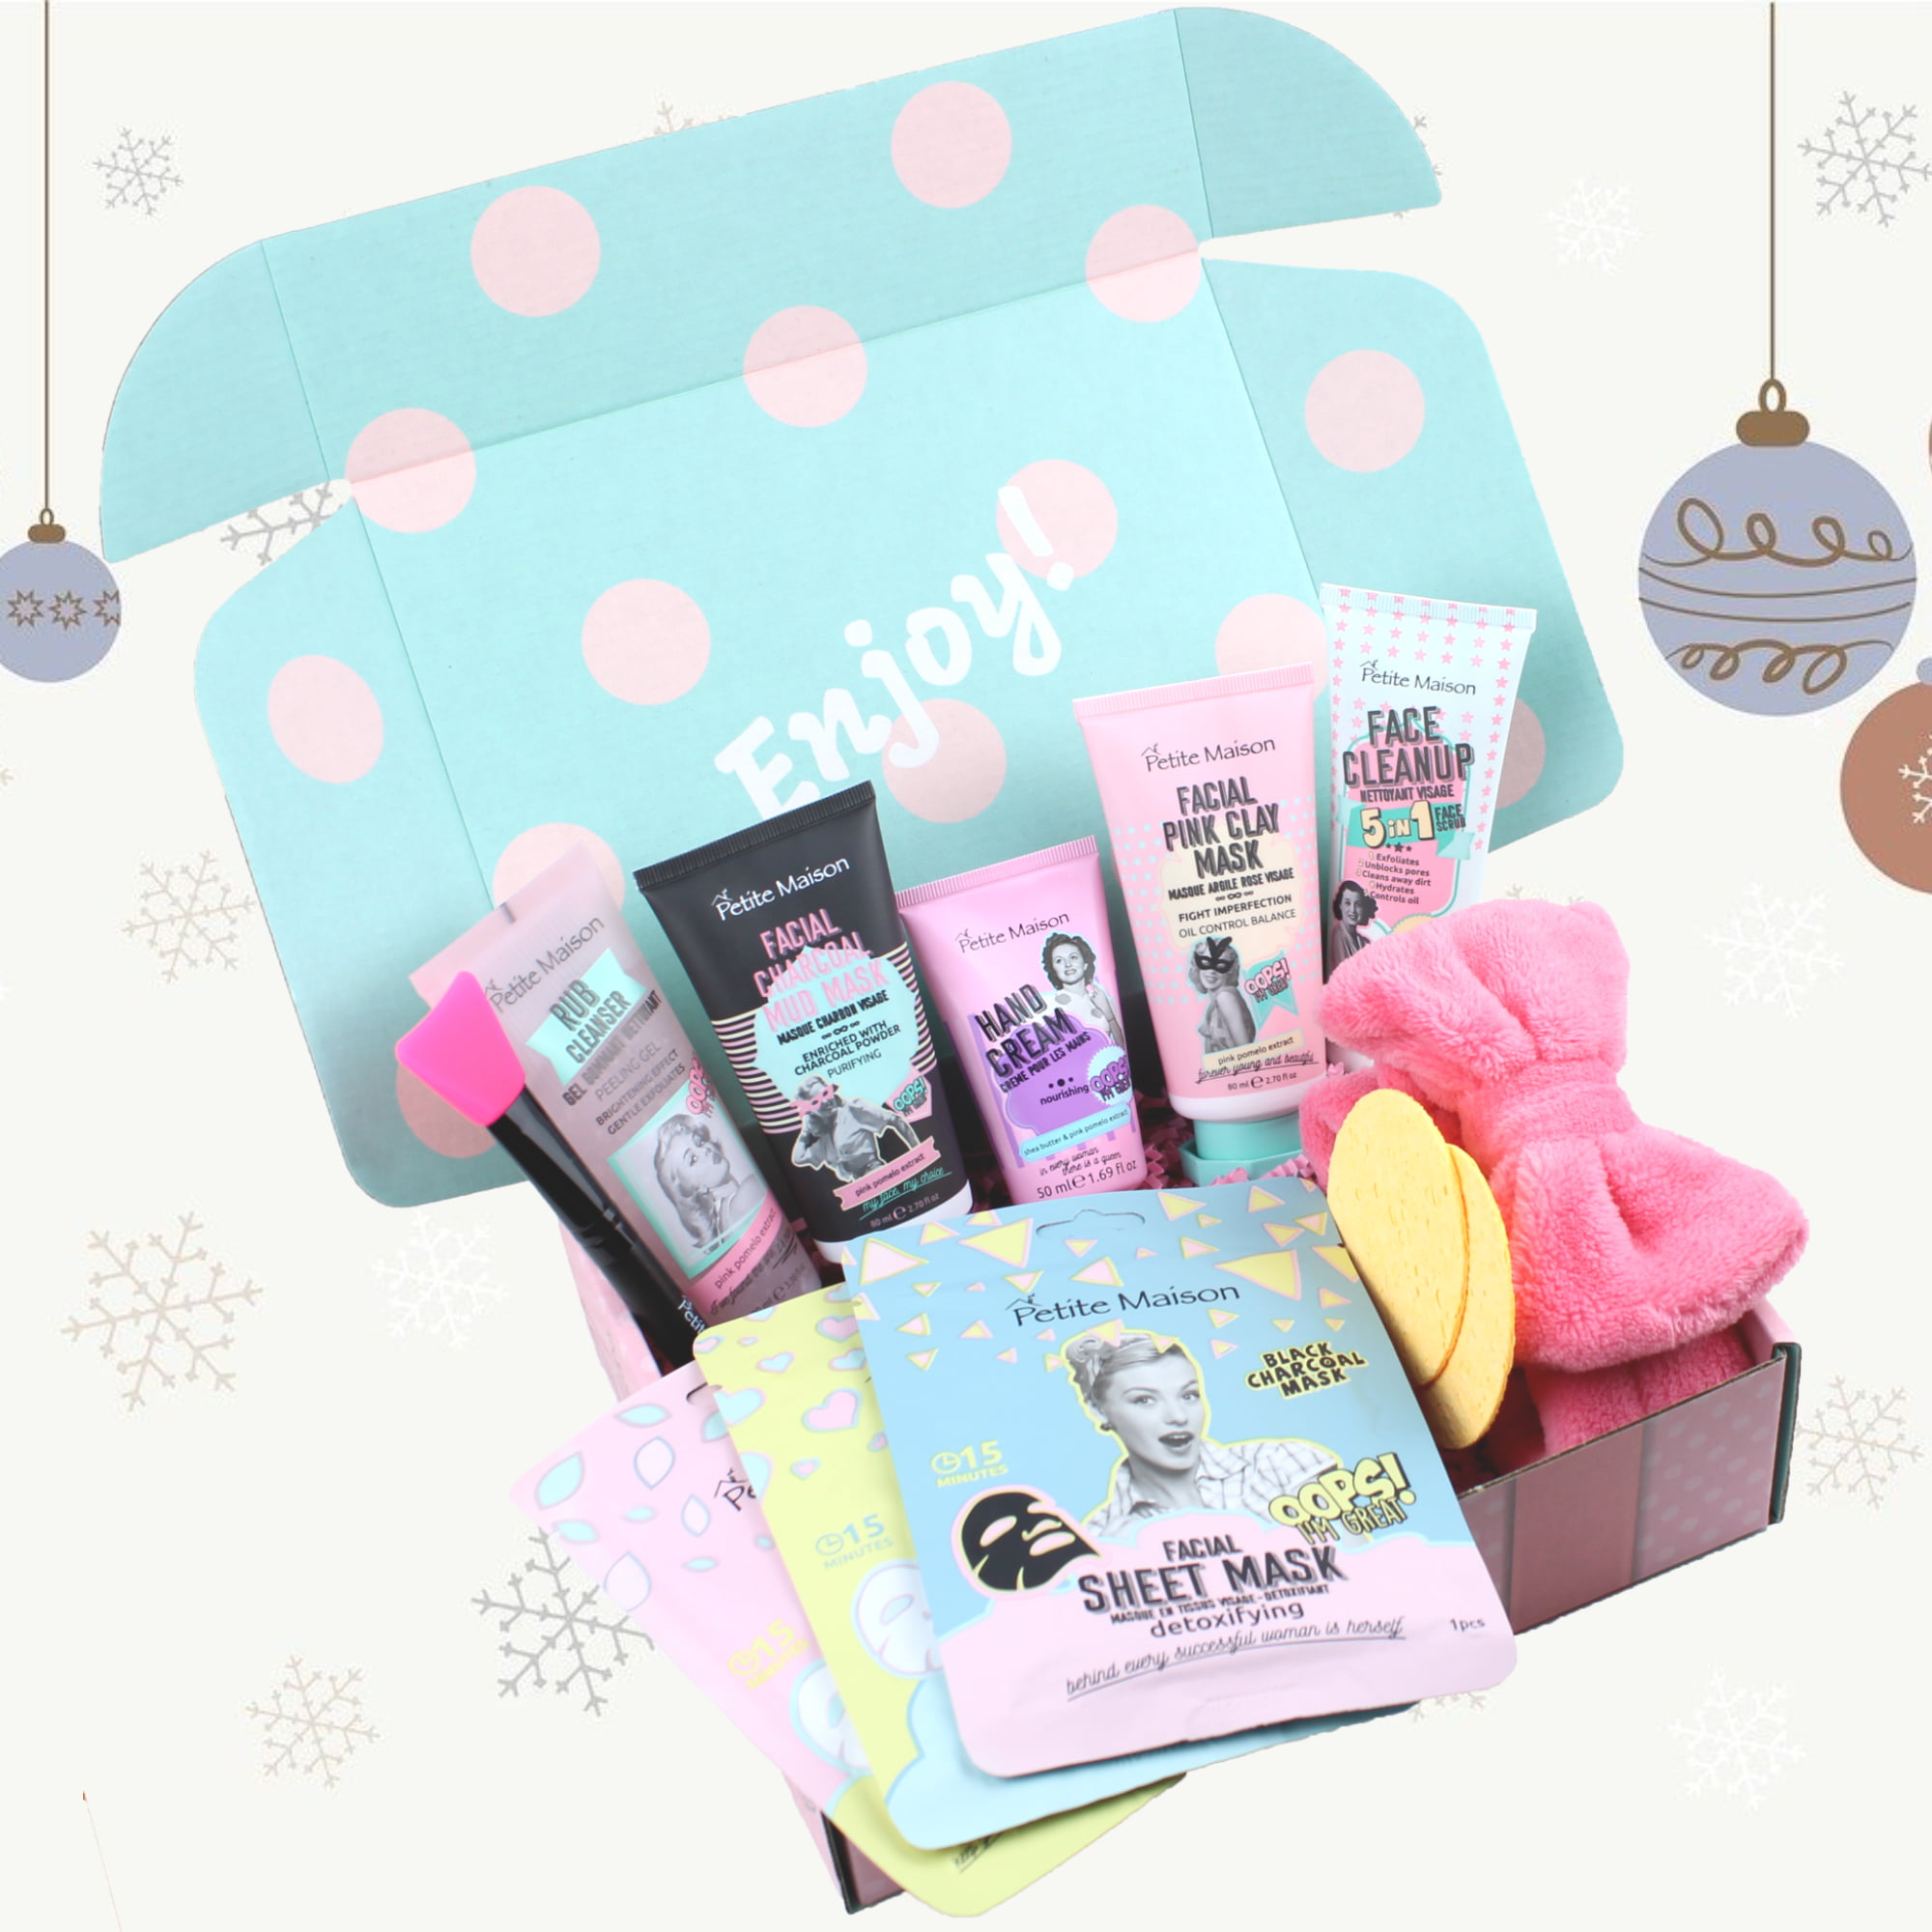  Happy Birthday Gifts for Women – Woman Gift Basket Set, Bday  Box, Unique Friendship Care Package, Female Presents, Surprise Delivery  Boxes - Fun Ideas for Her, Mom, Daughter, Sister, Wife, Friend 